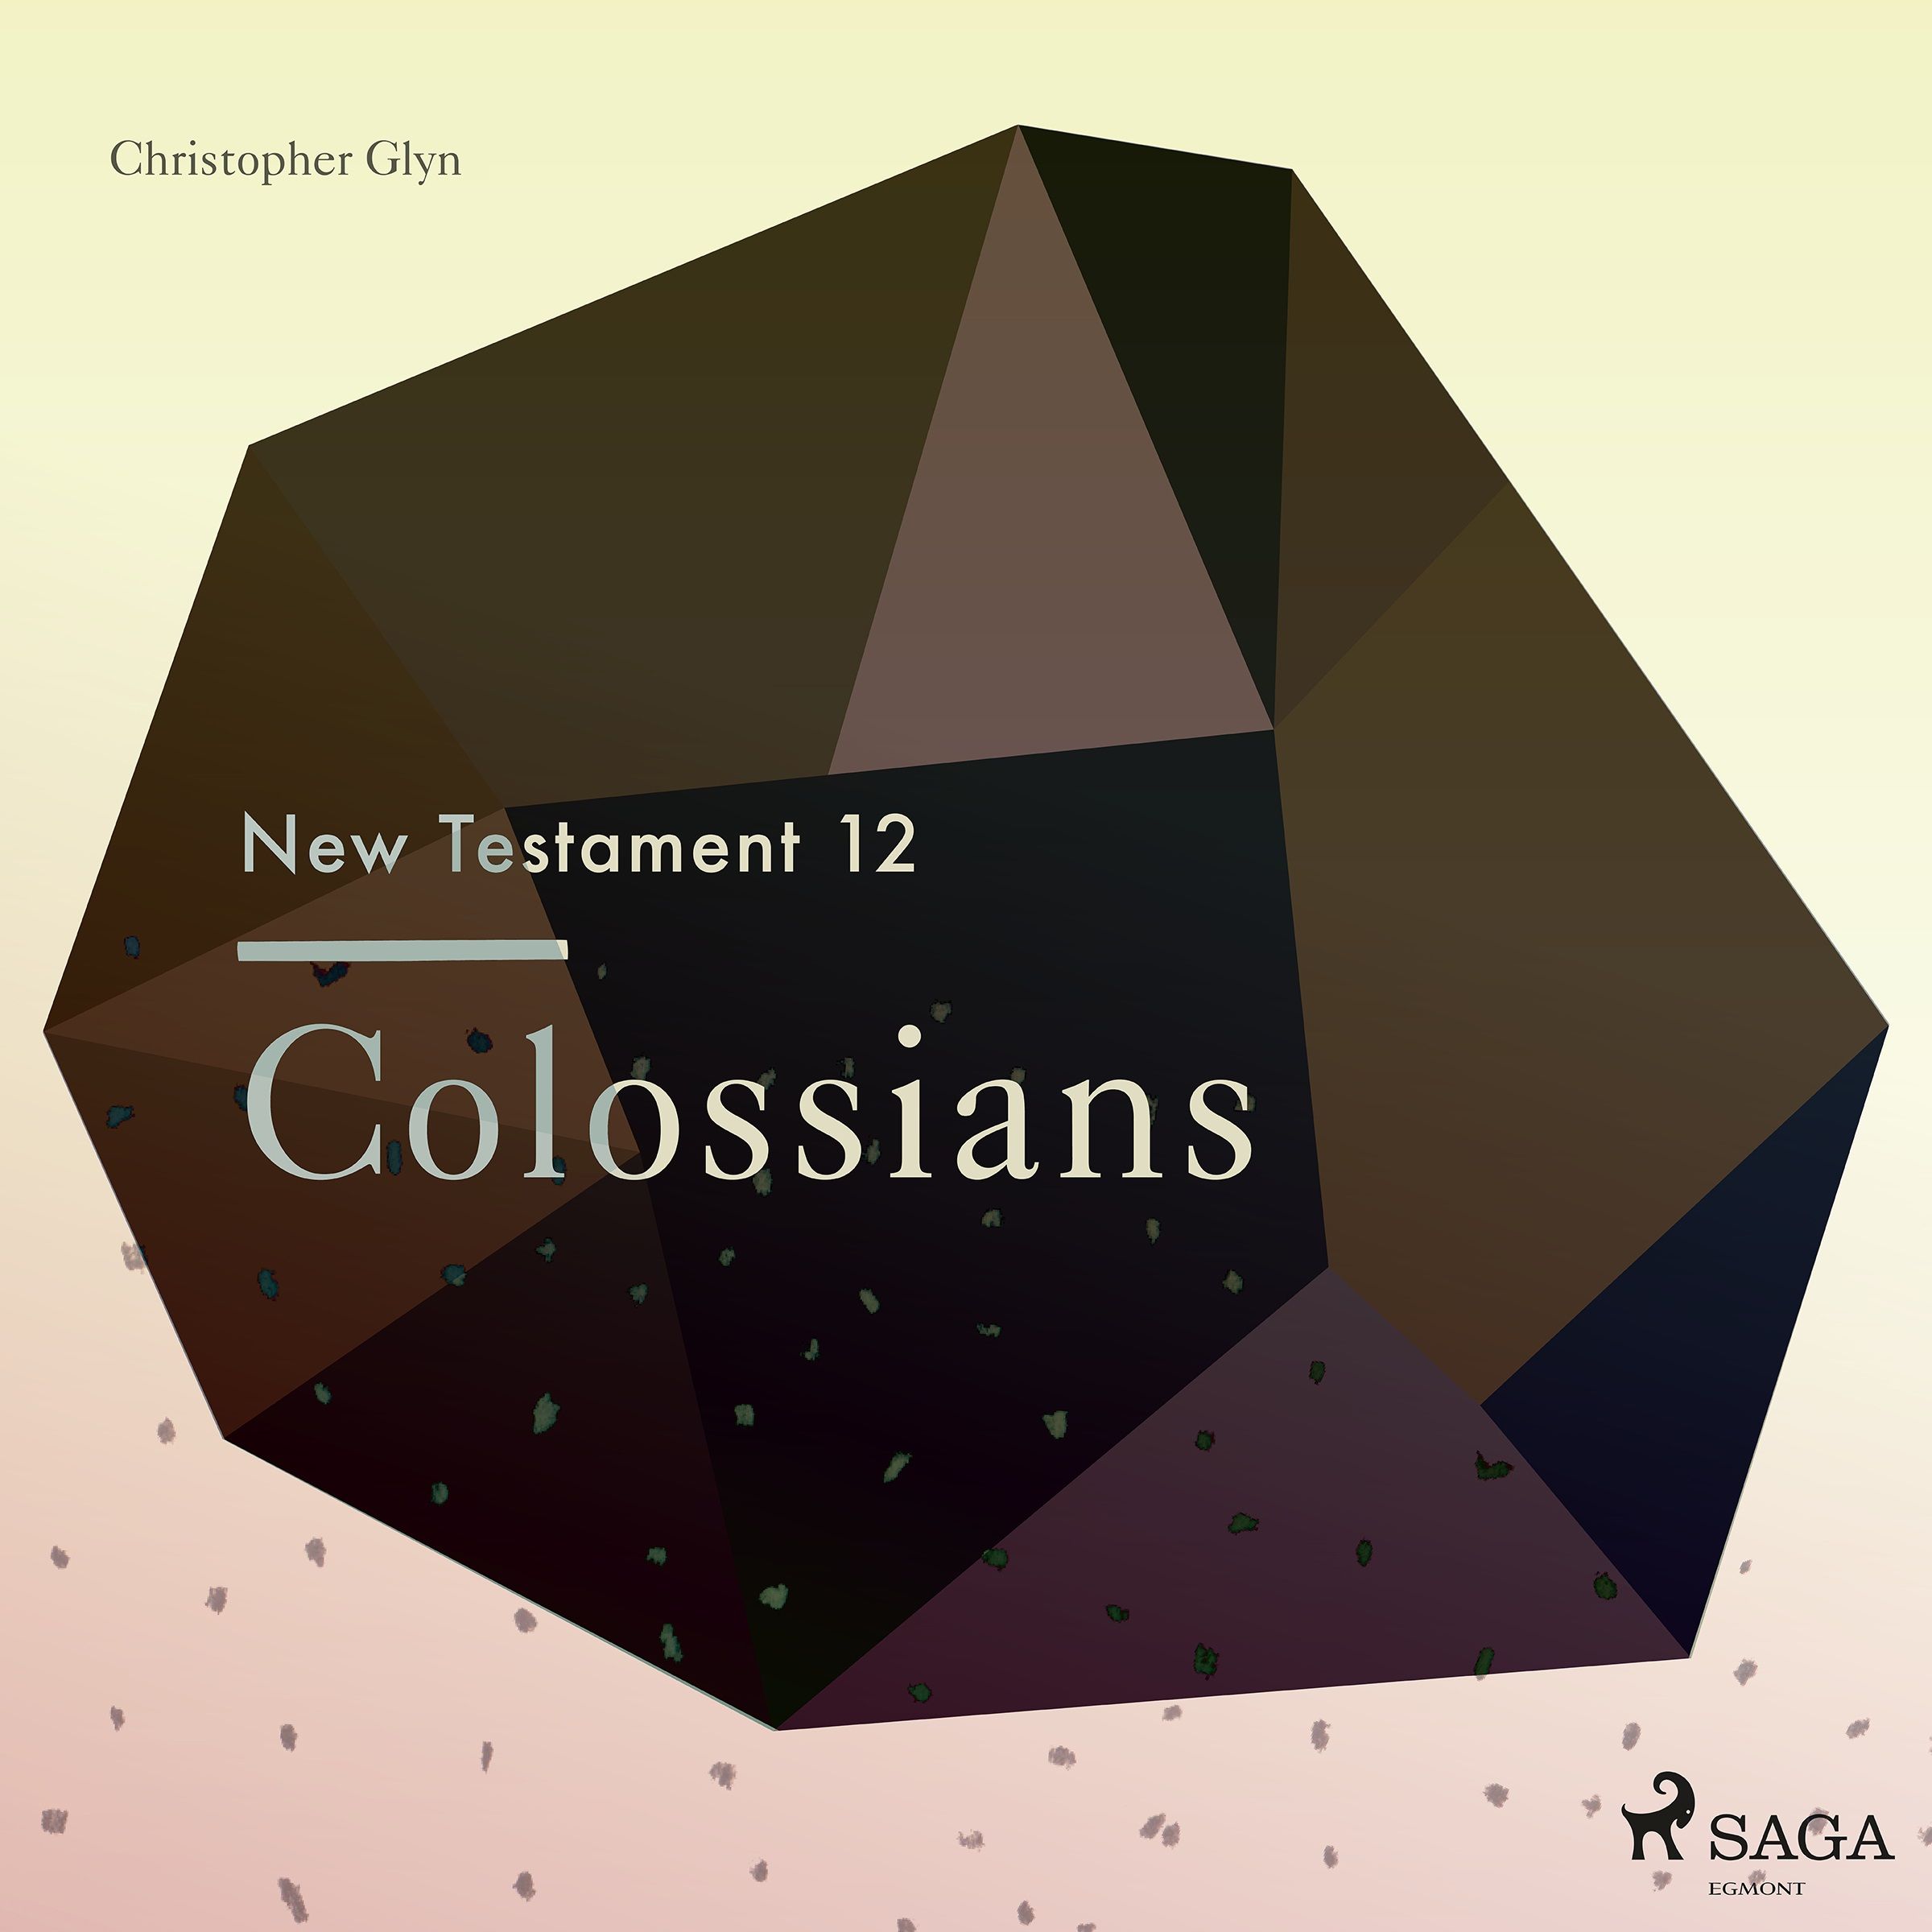 The New Testament 12 - Colossians, audiobook by Christopher Glyn